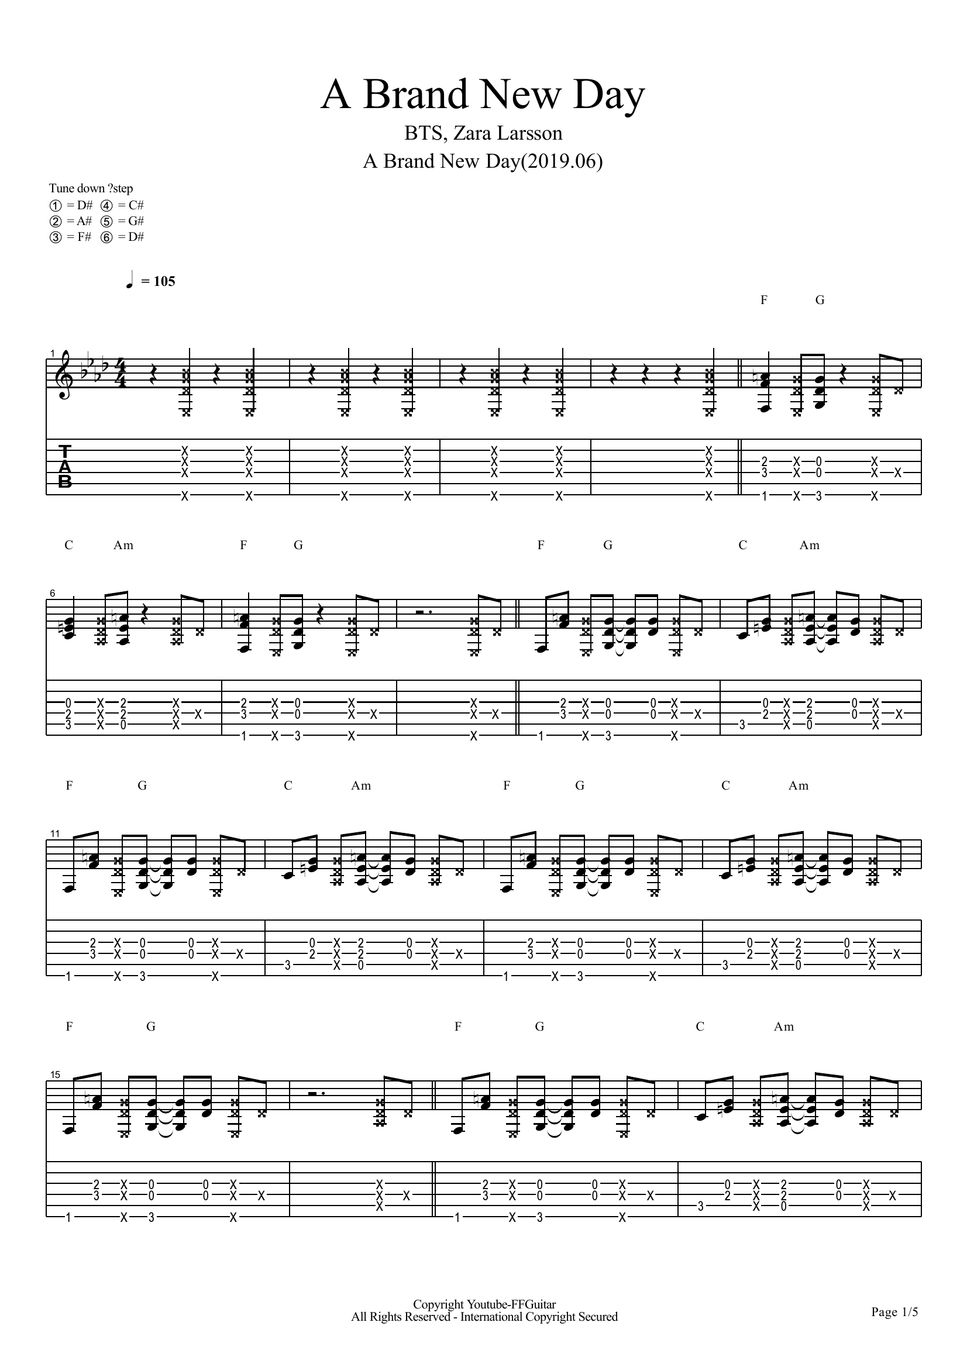 brand new day guitar chords